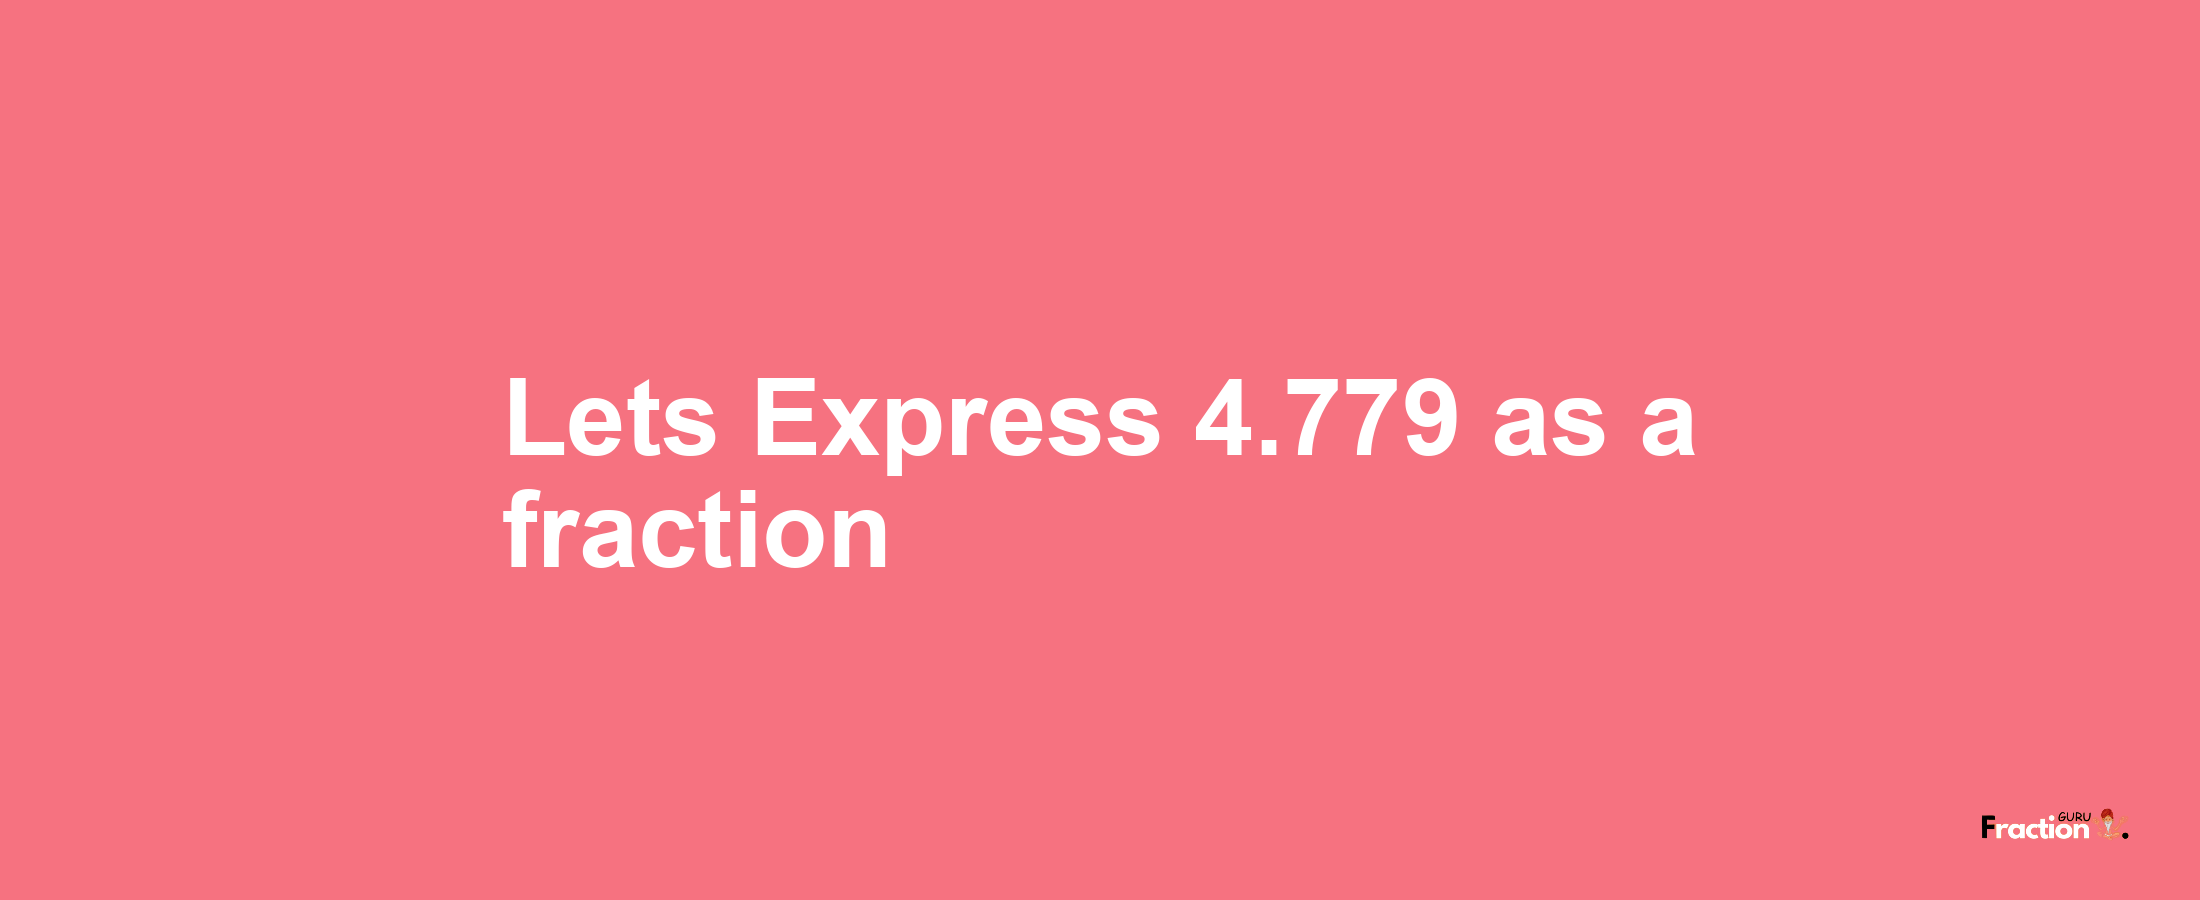 Lets Express 4.779 as afraction